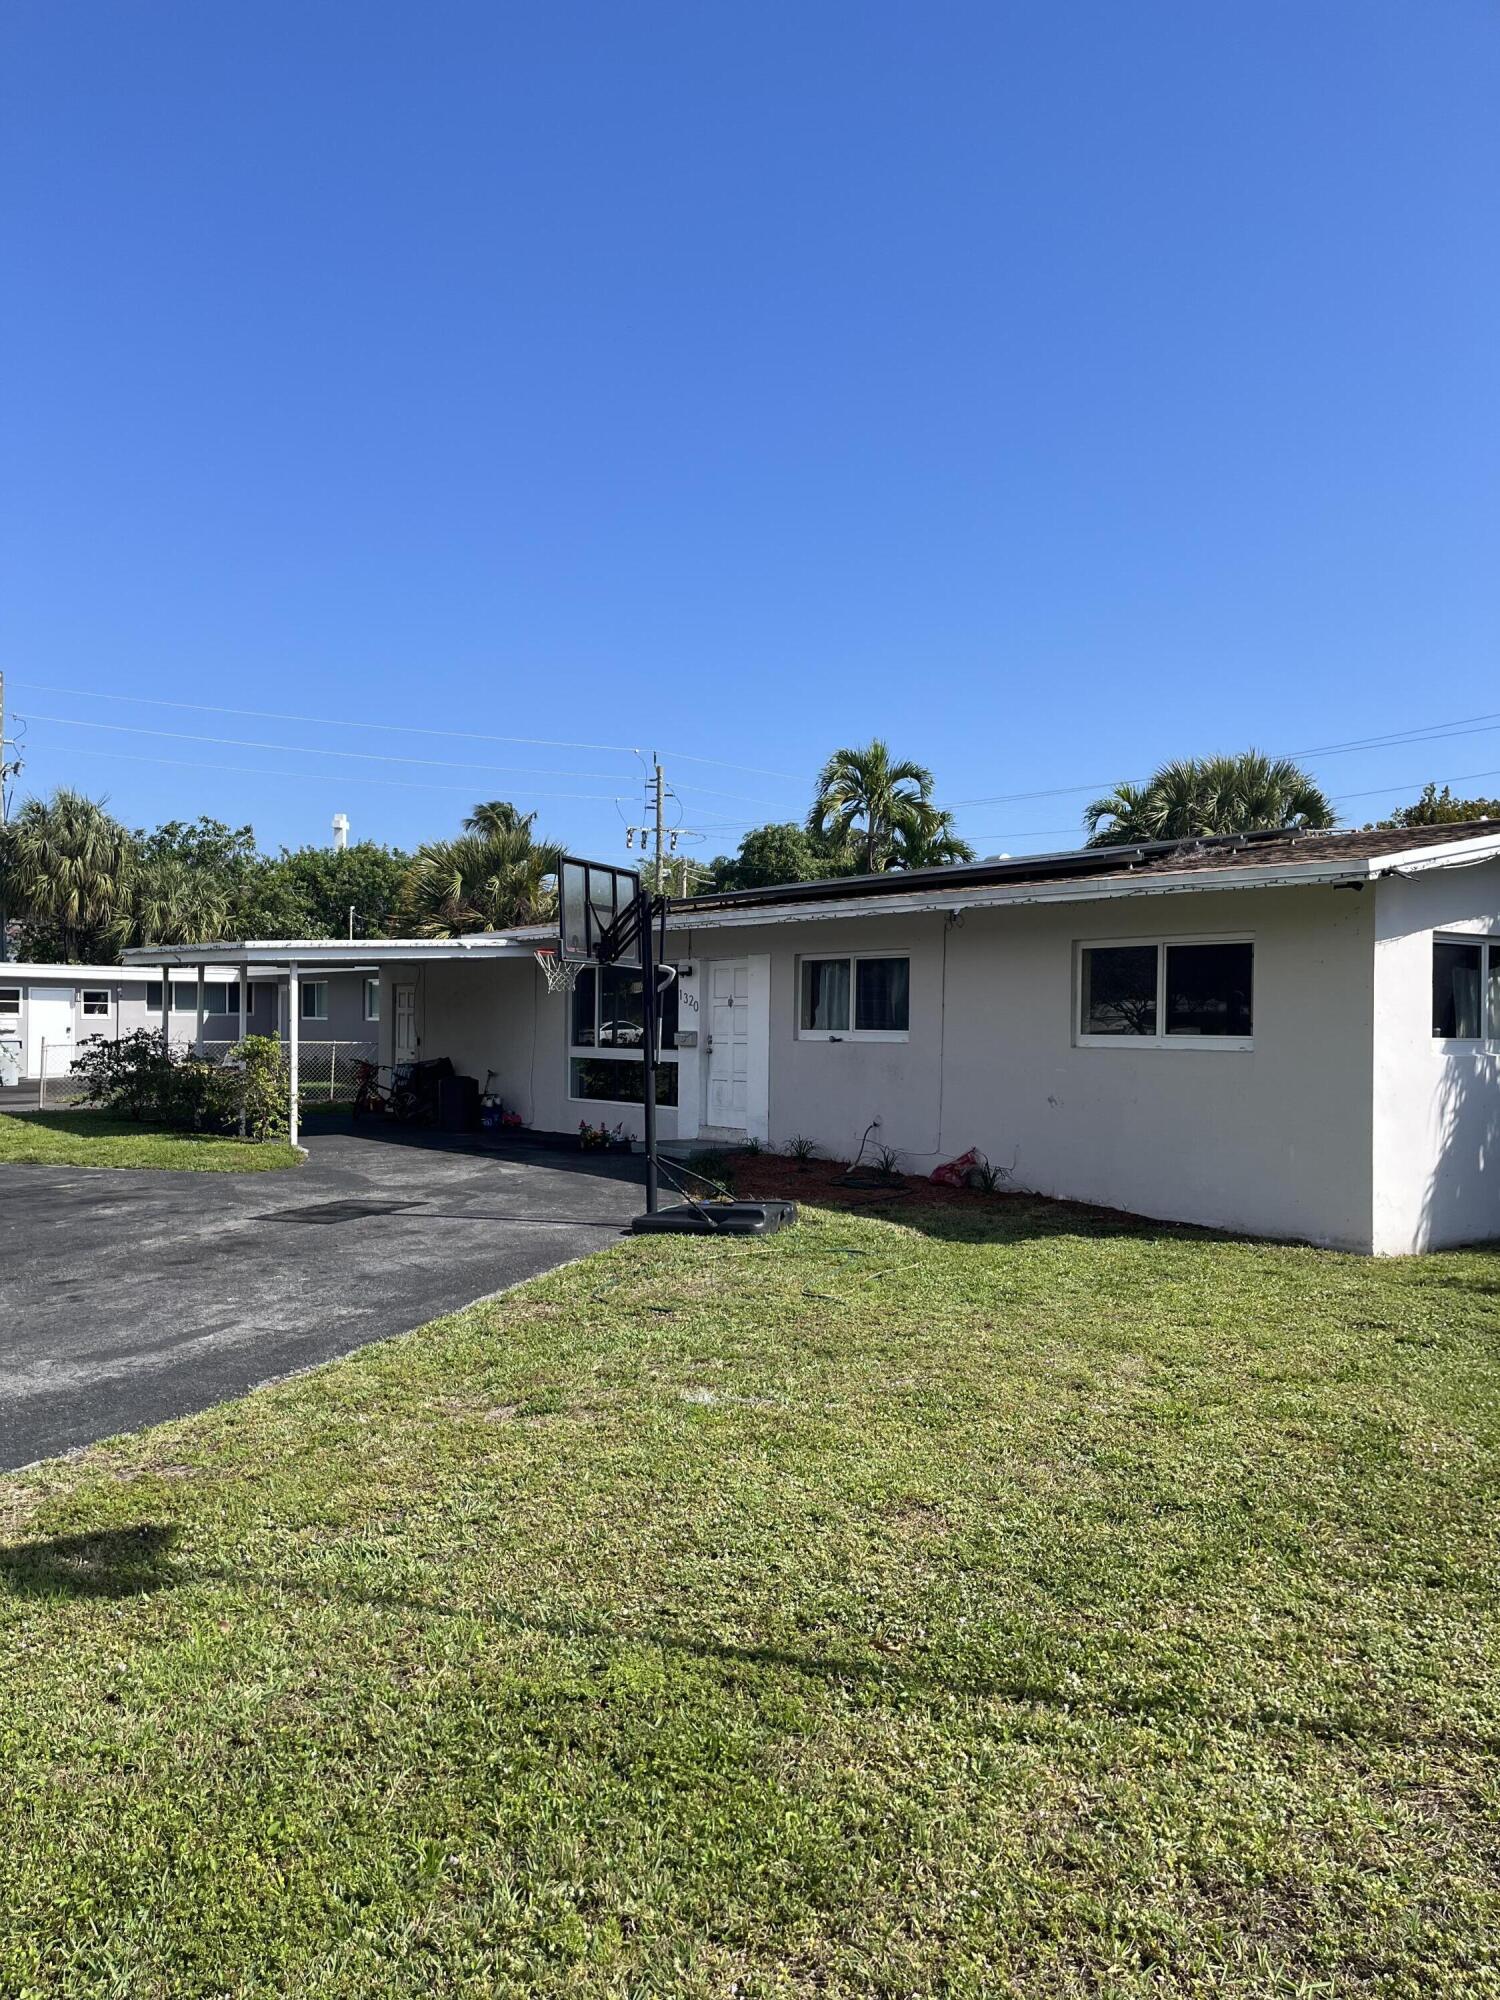 3 bd/2 ba less than 1 mile to the beach! Enjoy granite countertops and stainless steel appliances along with spacious open living areas with tons of natural light. Other features include tankless water heater, mud room,  impact windows throughout. Layout could facilitate a multi-generational family home. No Association. Solar Panels (not paid in full) balance will be finance by new buyer in property taxes assessment PACE). There is extra living space with its individual entrance that can easily be converted for an in-law quarters or rental income space.